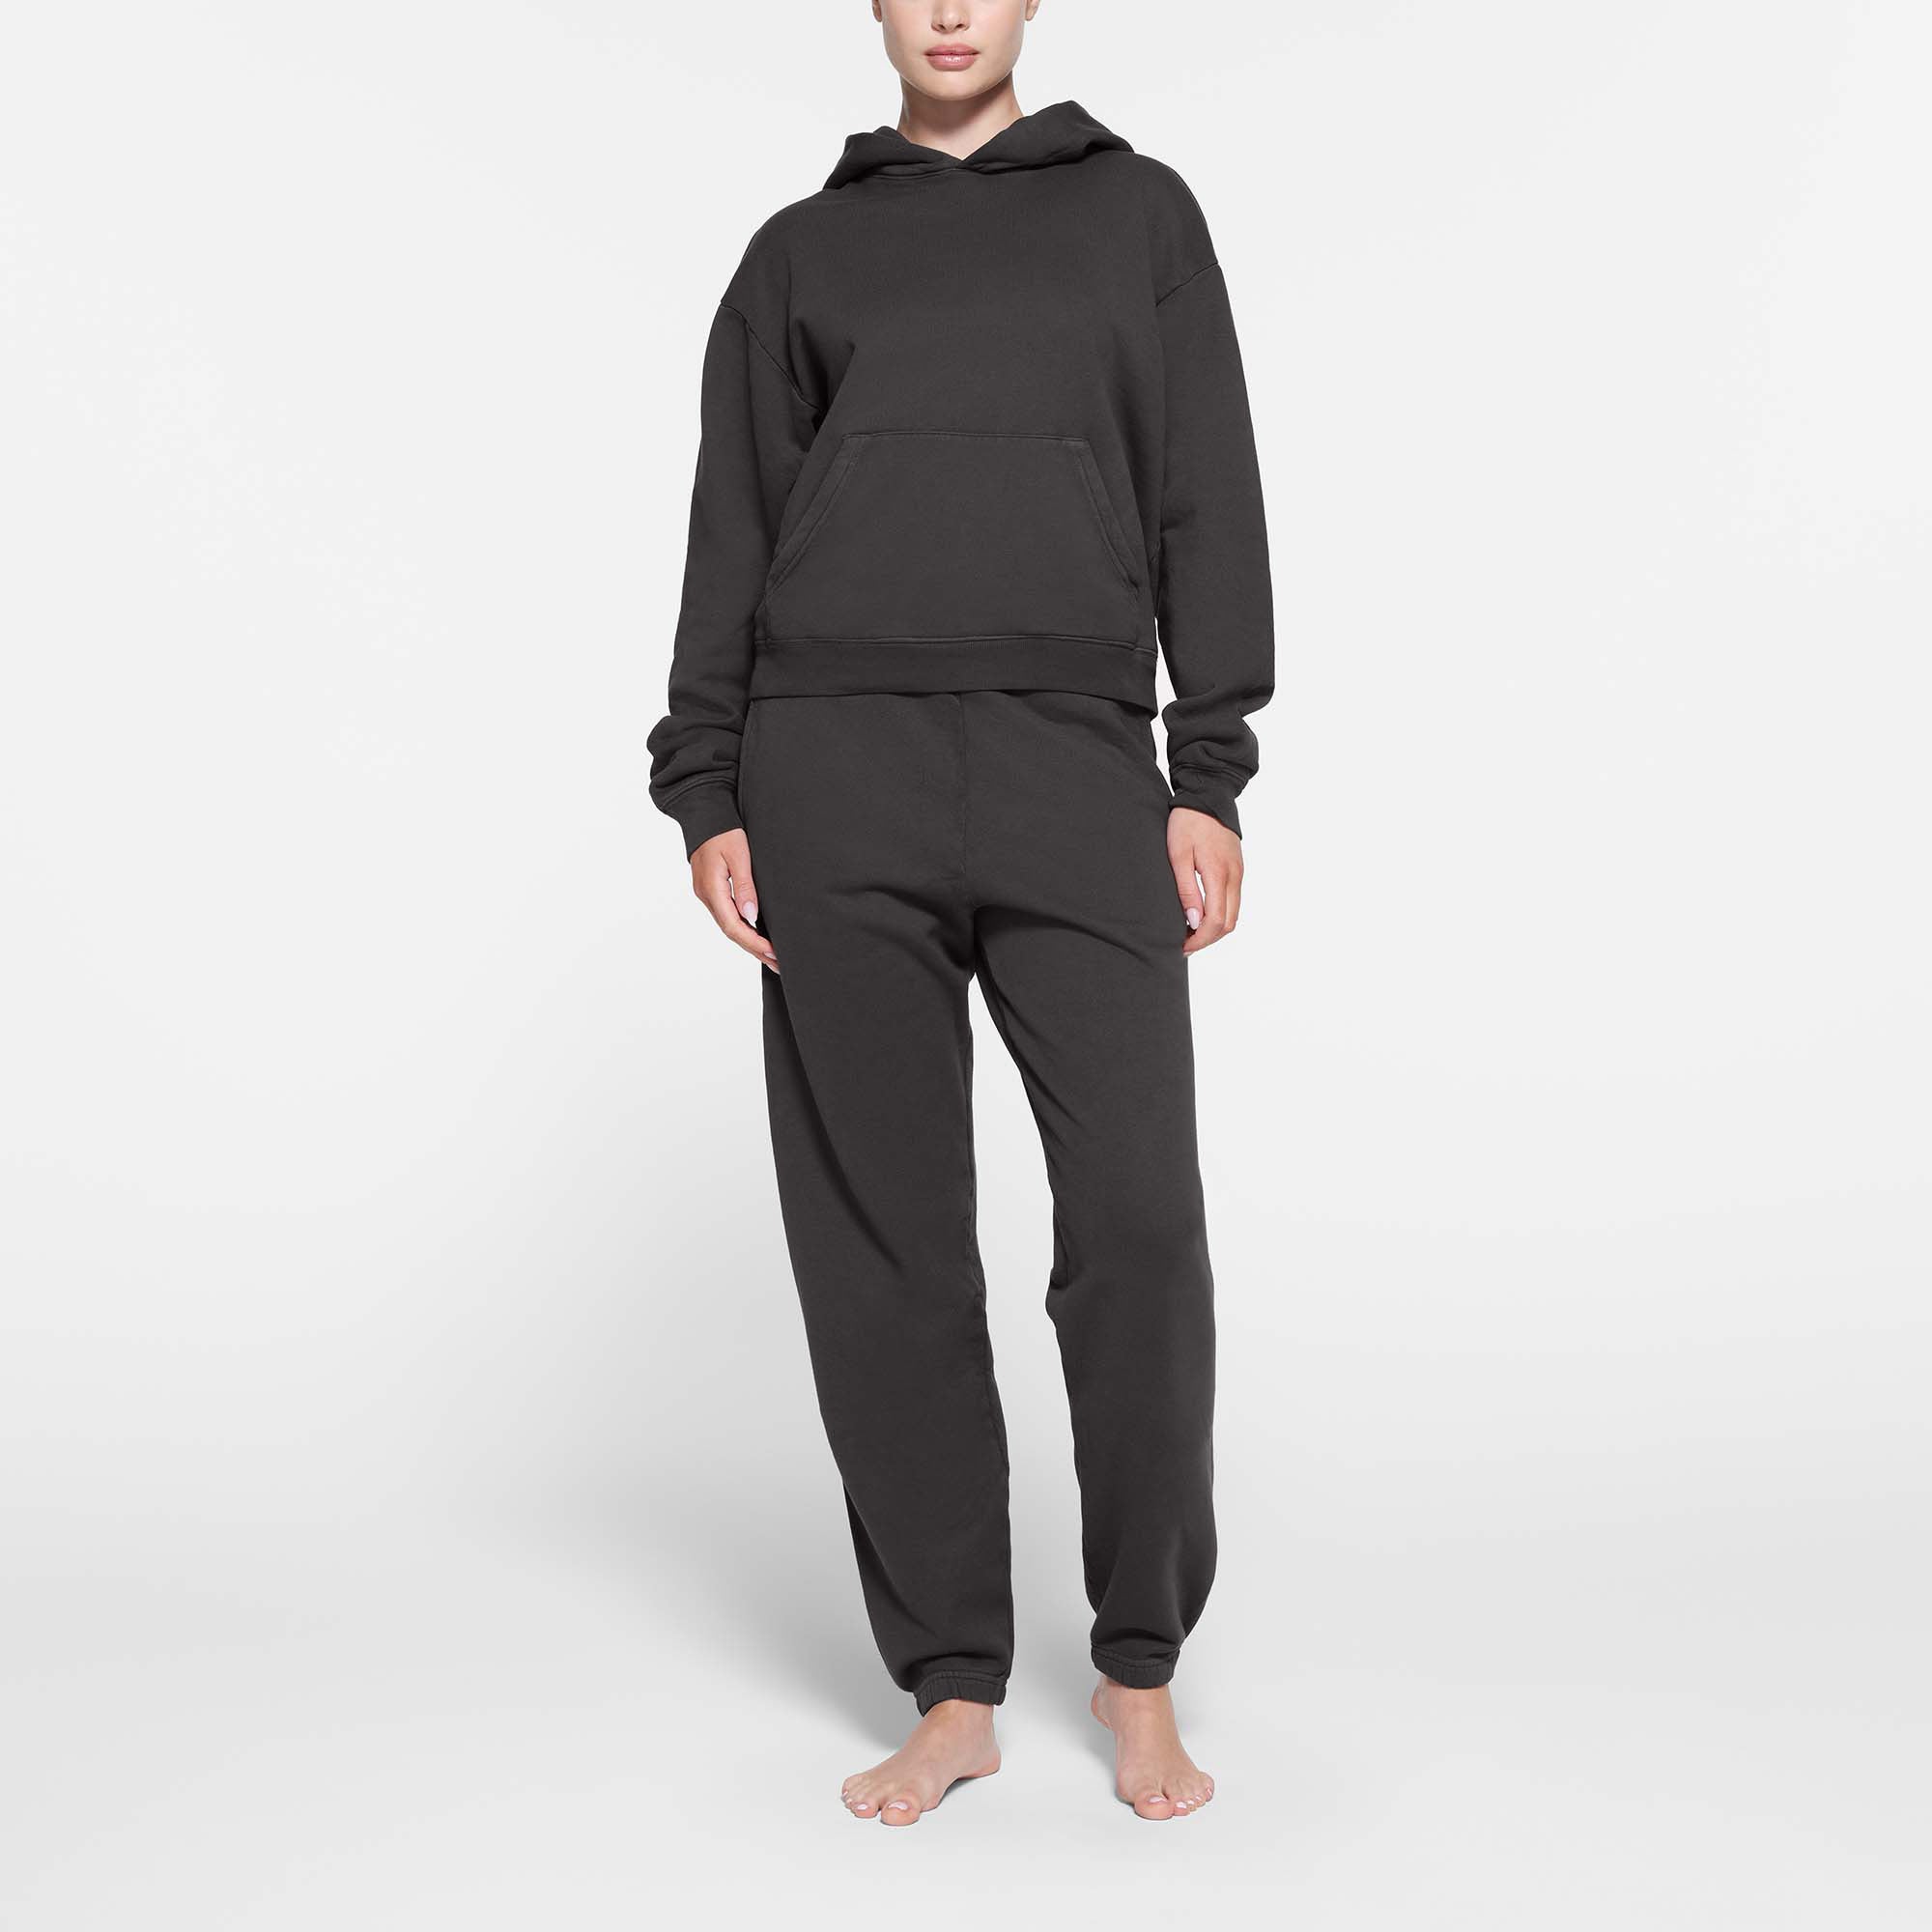 Colsie French Terry Lounge Jogger Pants, Hoodie, and Seamless